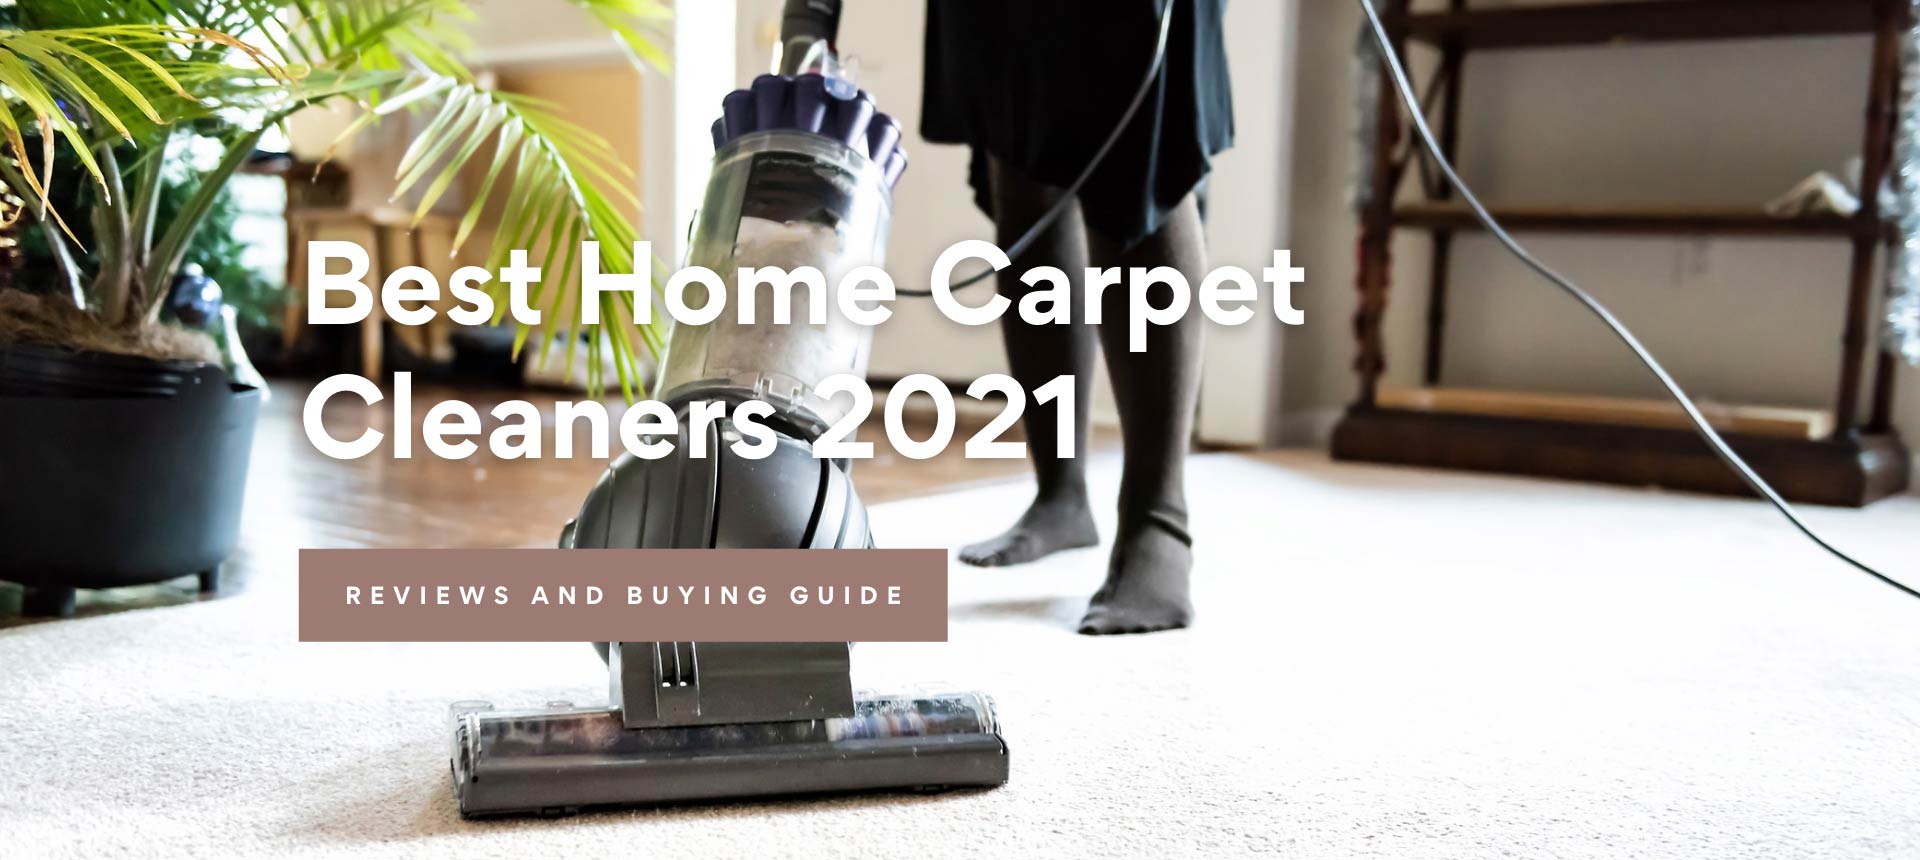 Best Home Carpet Cleaners 2021